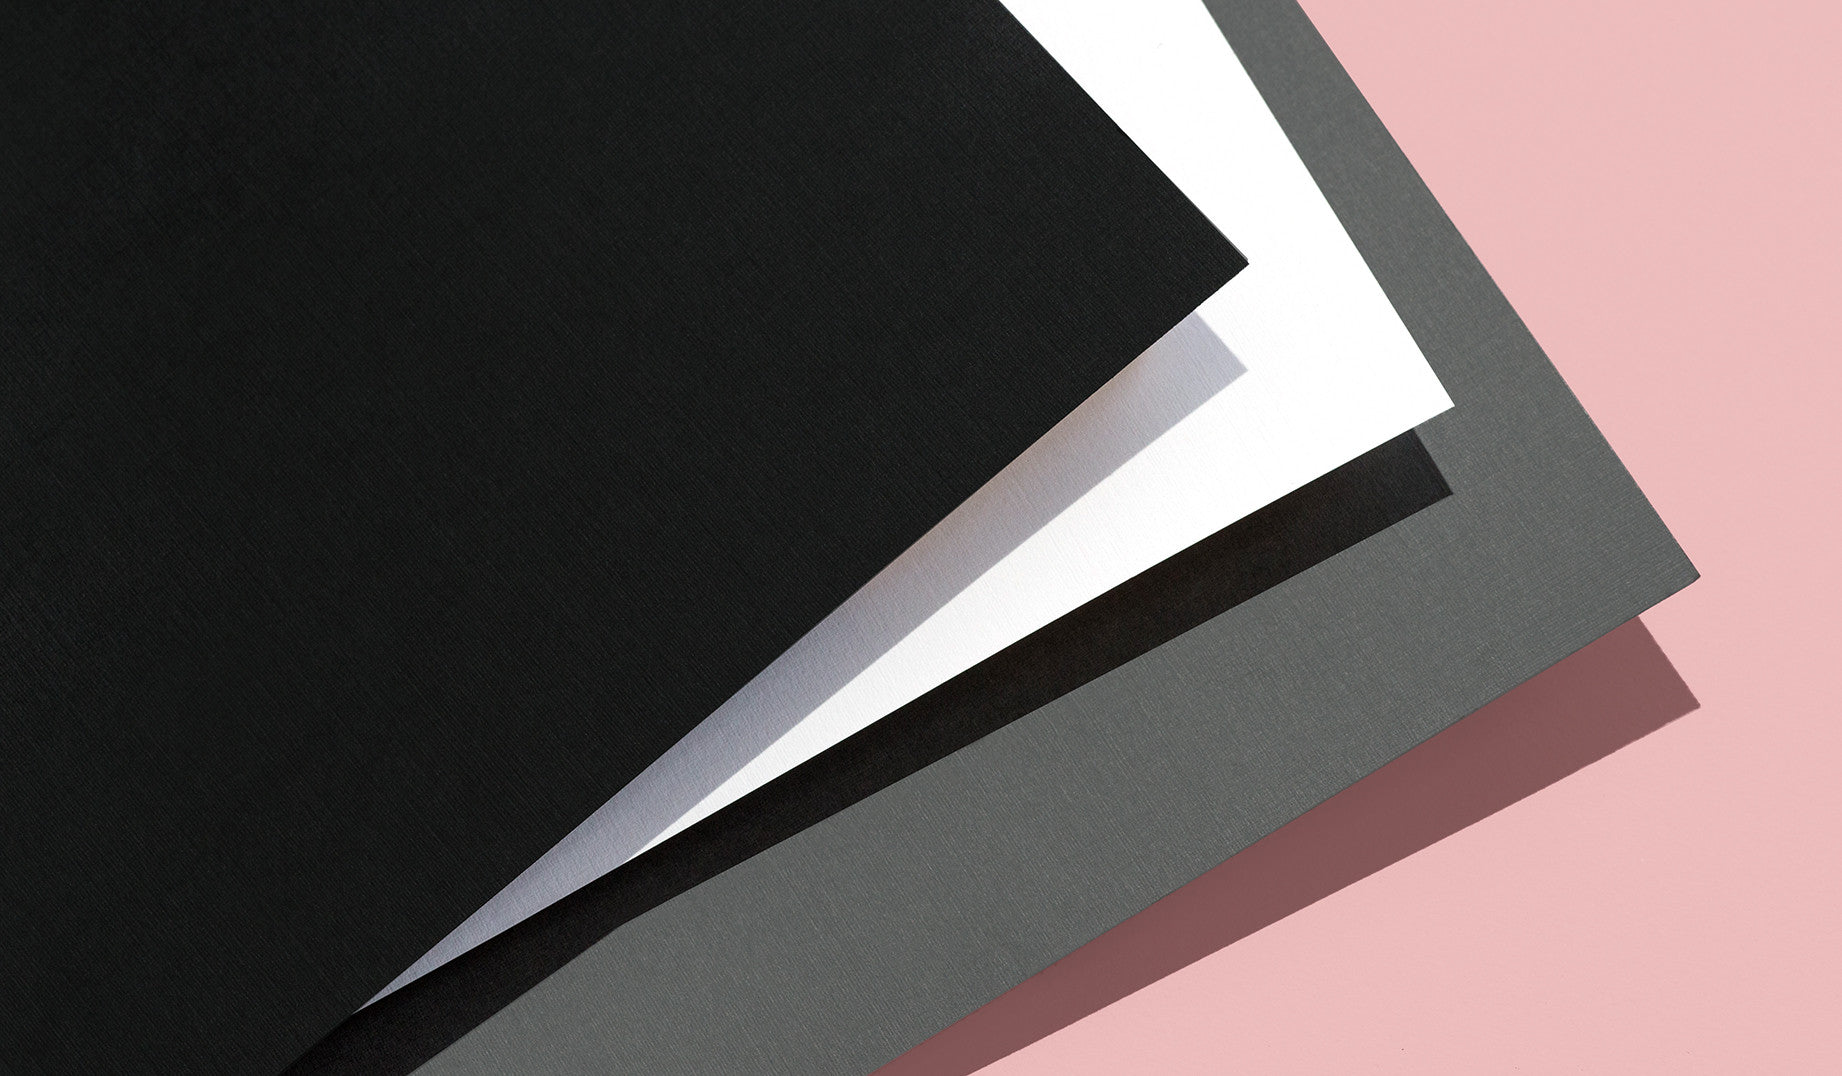 All Paper Chase Press hardcover books feature premium linen paper endsheets, which provide both durability and an elegant finish. Choose from black, gray, or white.